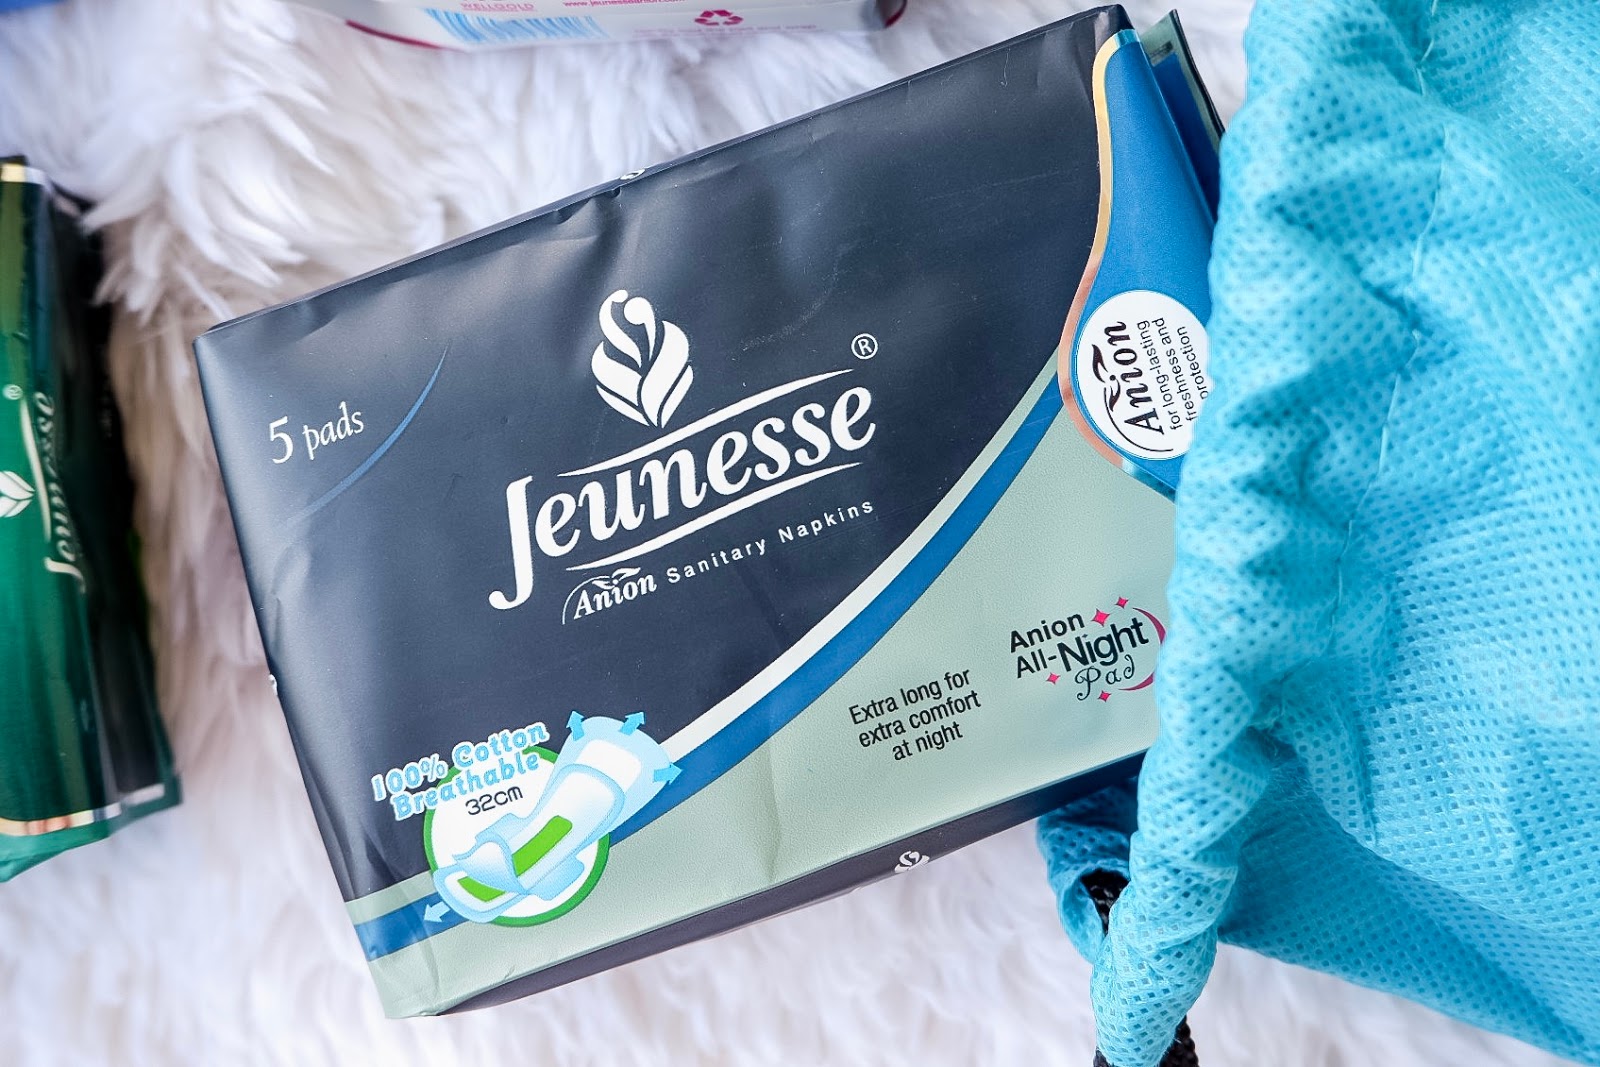 Why I Love Jeunesse Anion Sanitary Napkin and Why It's The Only Brand I Trust